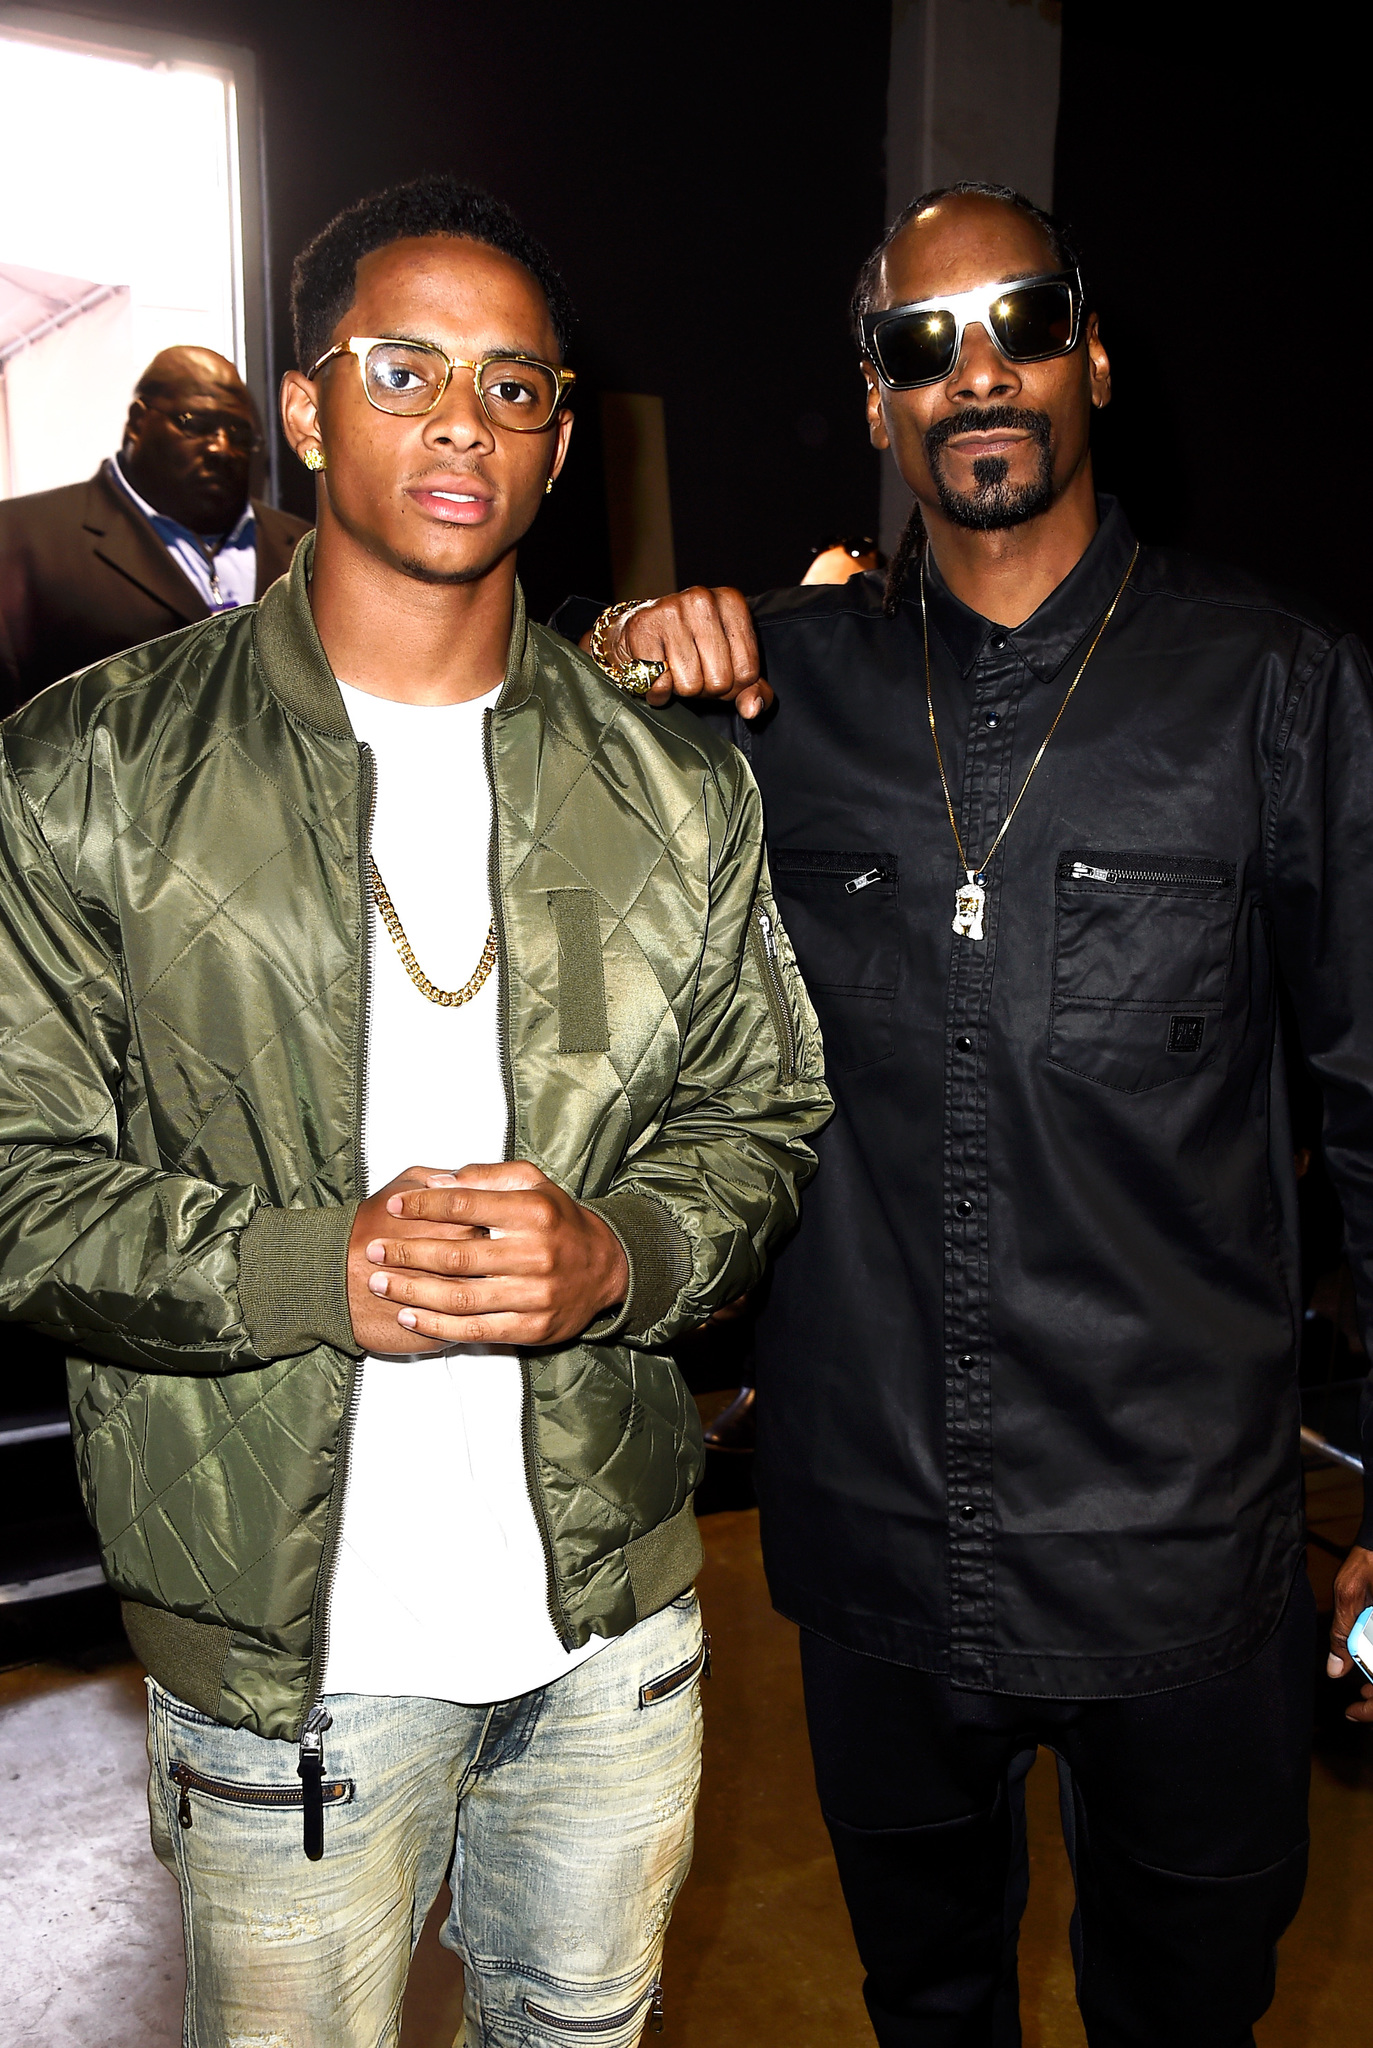 Snoop Dogg and Cordell Broadus at event of IHeartRadio Music Awards (2015)